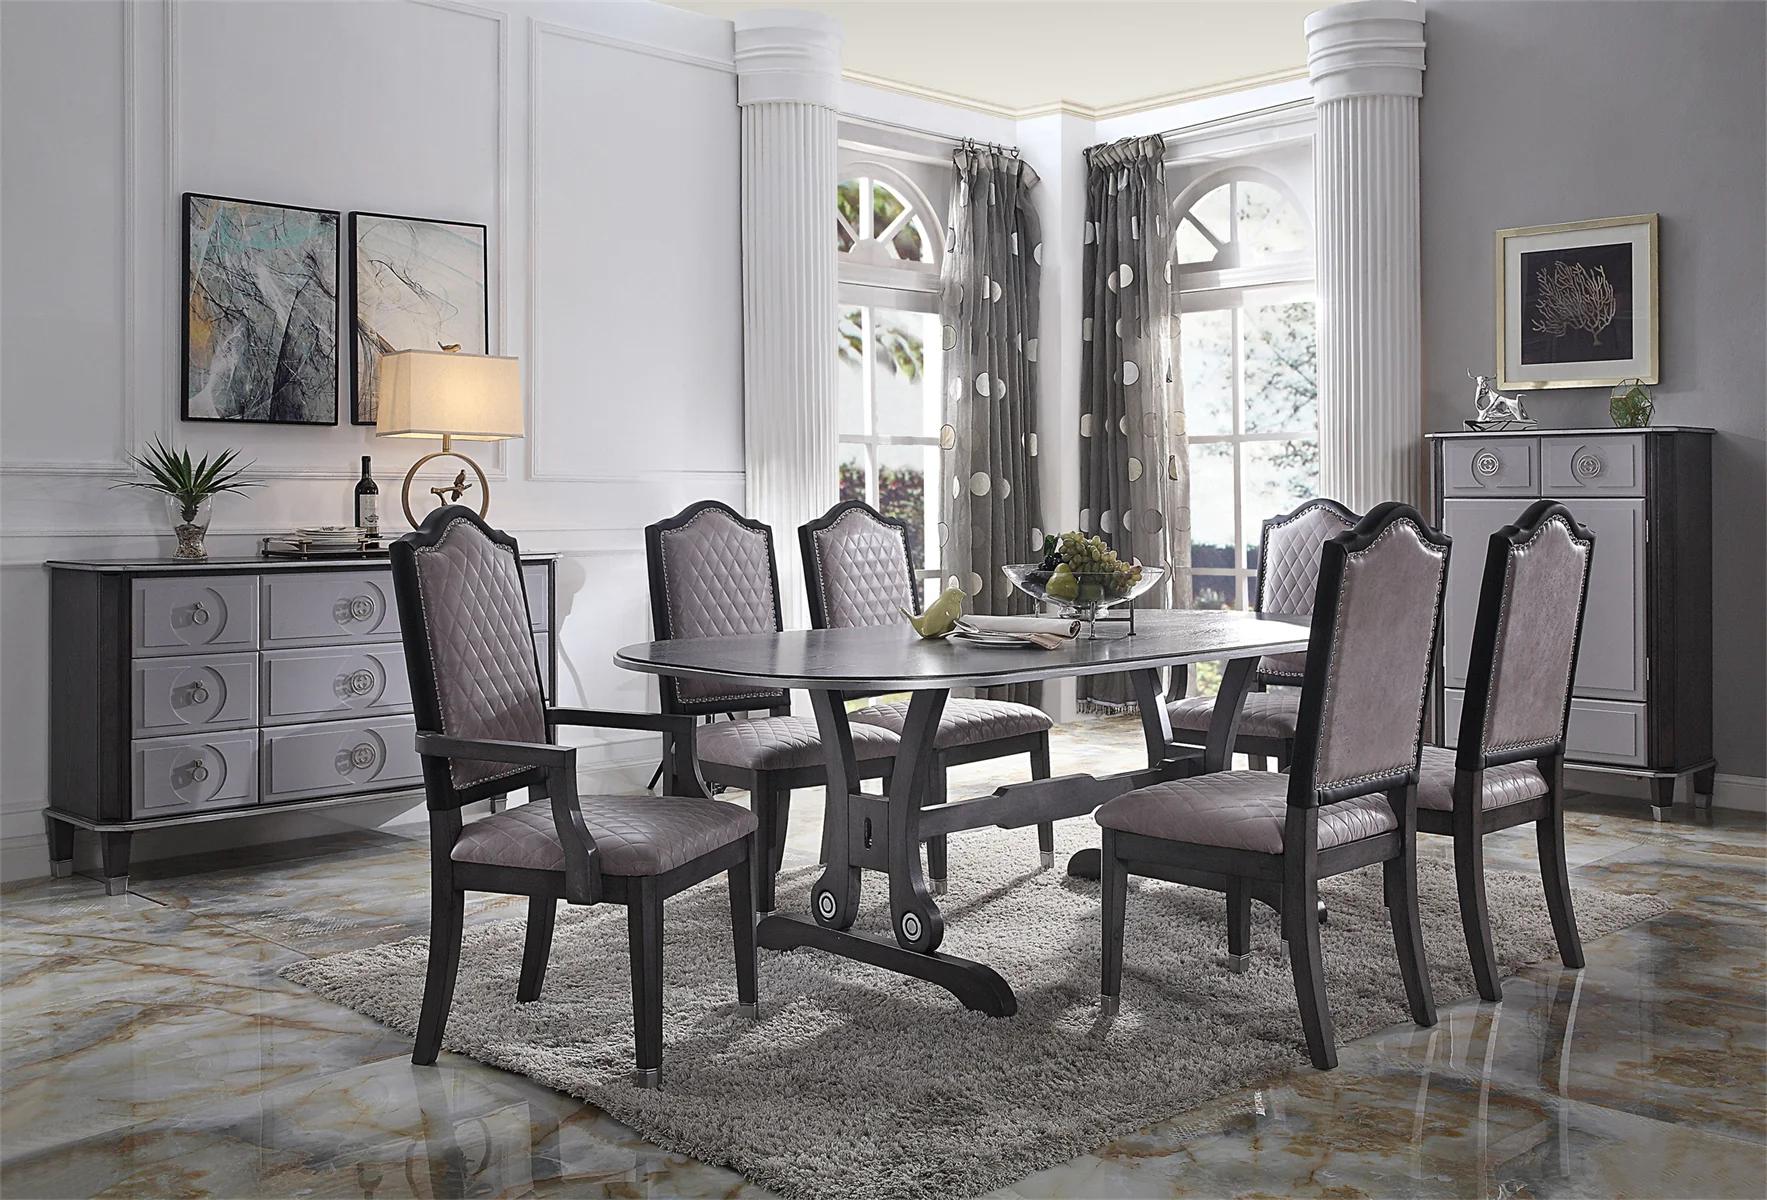 

    
Transitional Charcoal Dining Table + 8x Chairs by Acme House Beatrice 68810-9pcs
